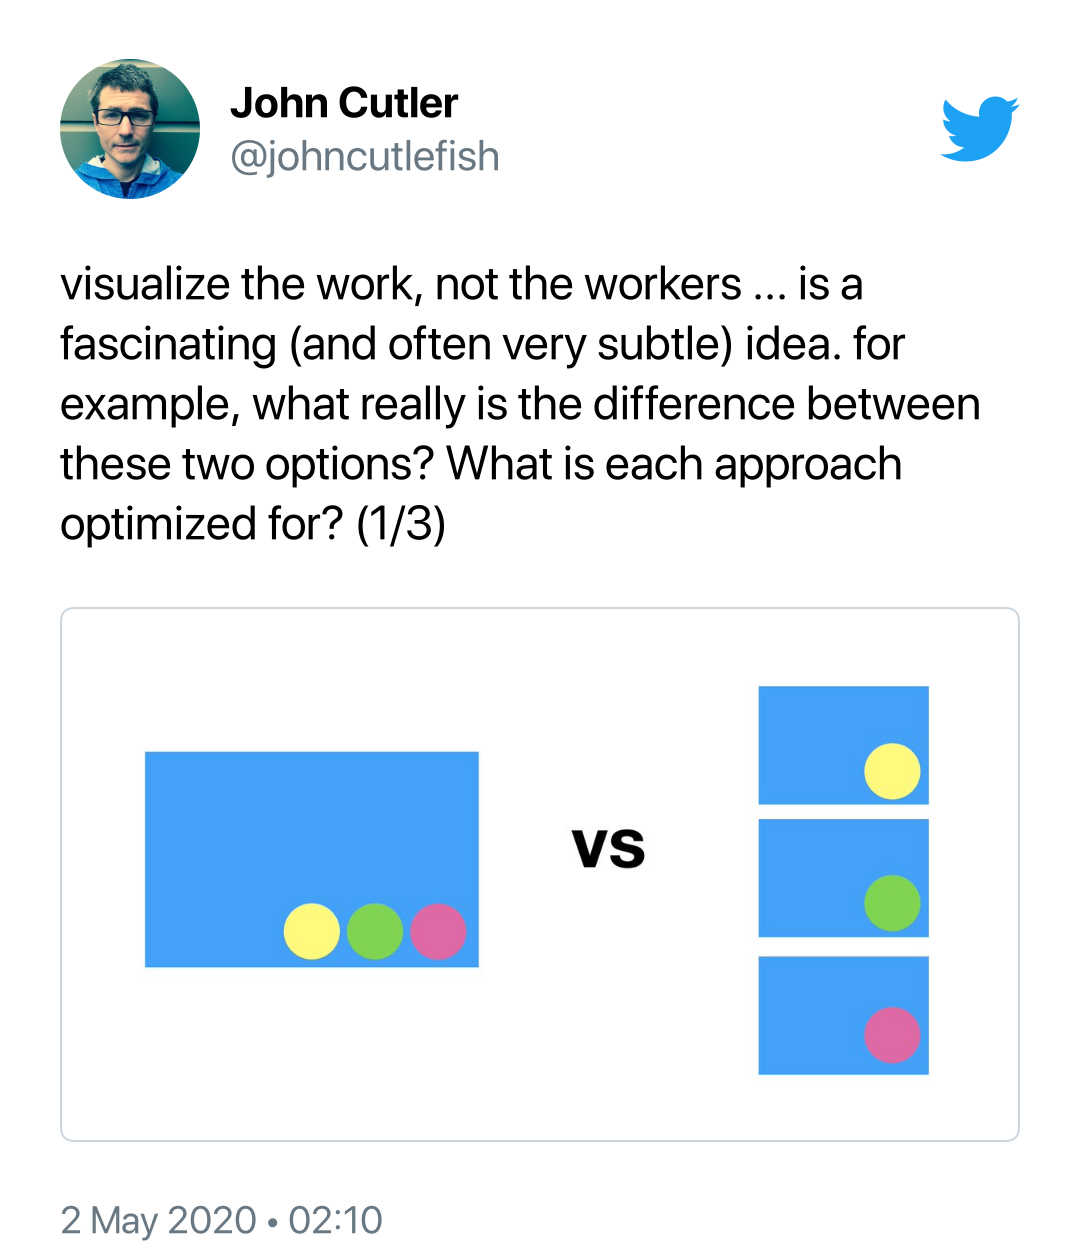 Tweet by John Cutler:visualize the work, not the workers ... is a fascinating (and often very subtle) idea. for example, what really is the difference between having only one assignee vs having multiple assignees? What is each approach optimized for?